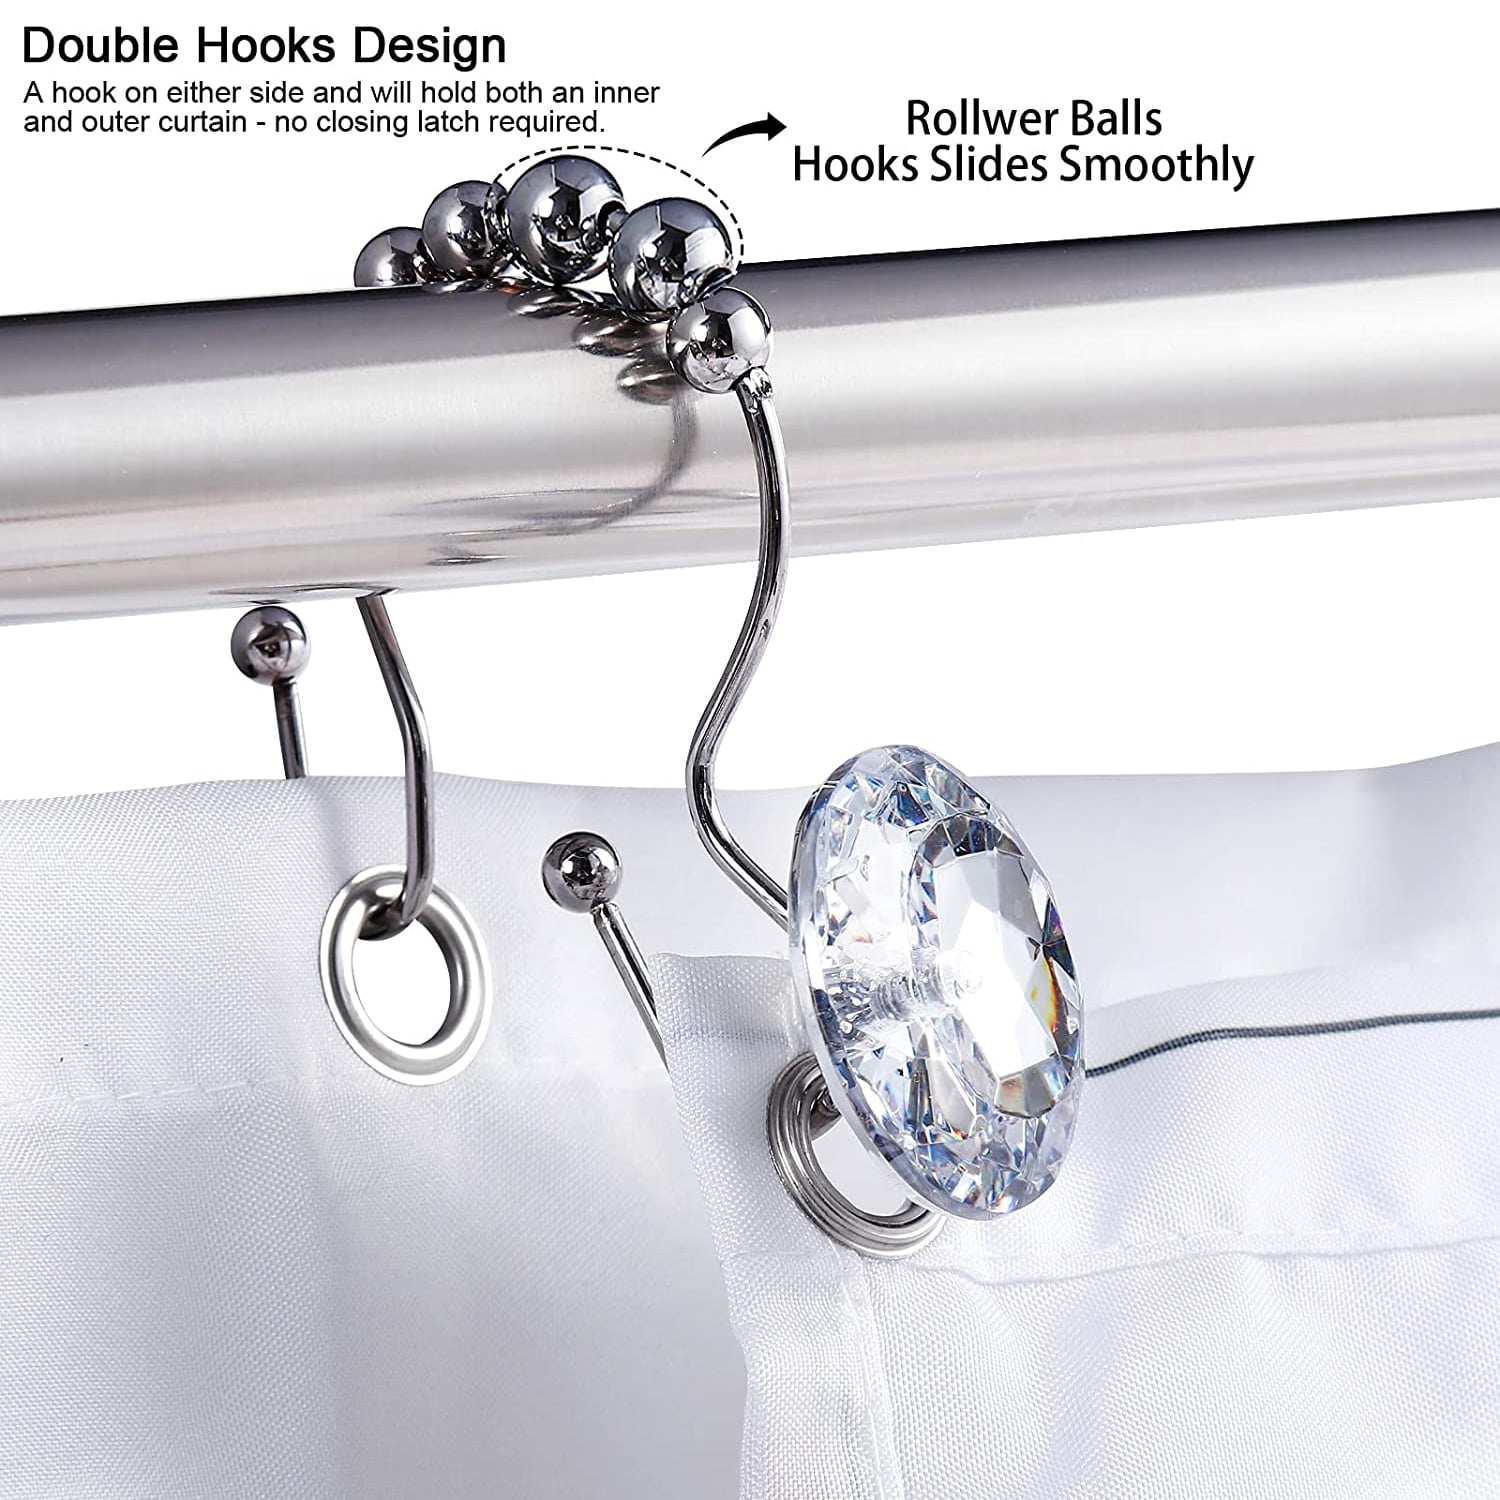 Maytex Shower Curtain Hooks, Shower Curtain Rings, Rust-Resistant  Decorative Double Roller Glide Shower Hooks, Shower Rings for Bathroom  Shower Rods